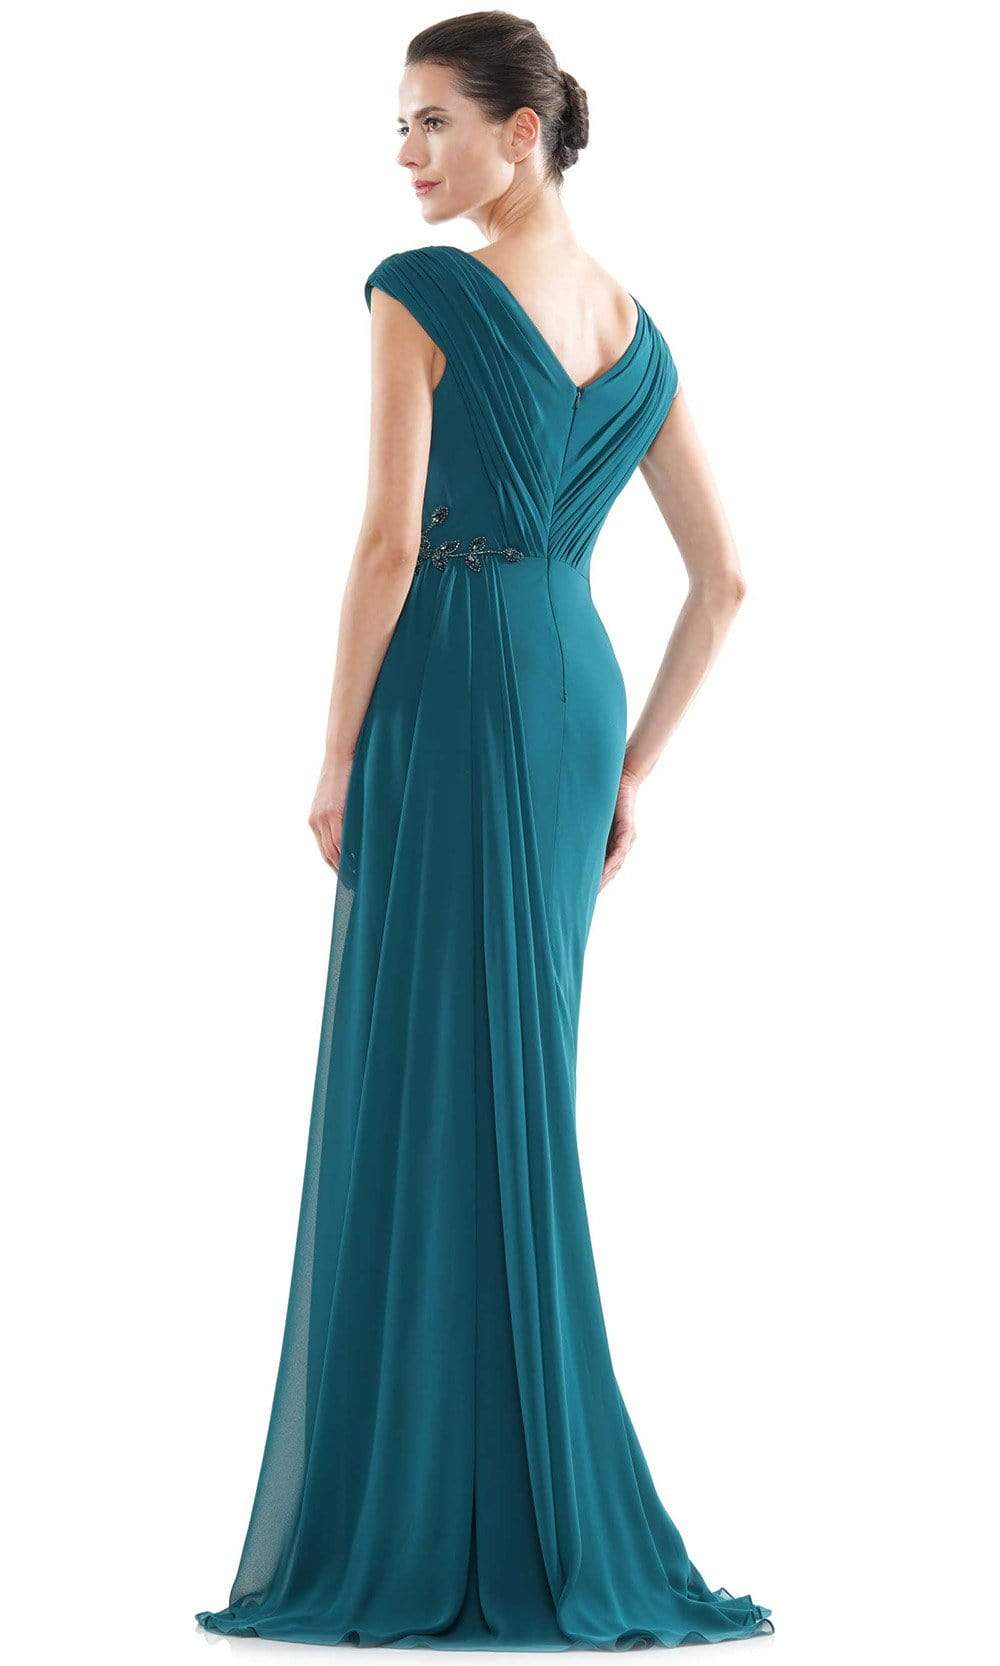 Marsoni by Colors - MV1080 Cap Sleeve Foliage Beaded Sheath Gown Mother of the Bride Dresses